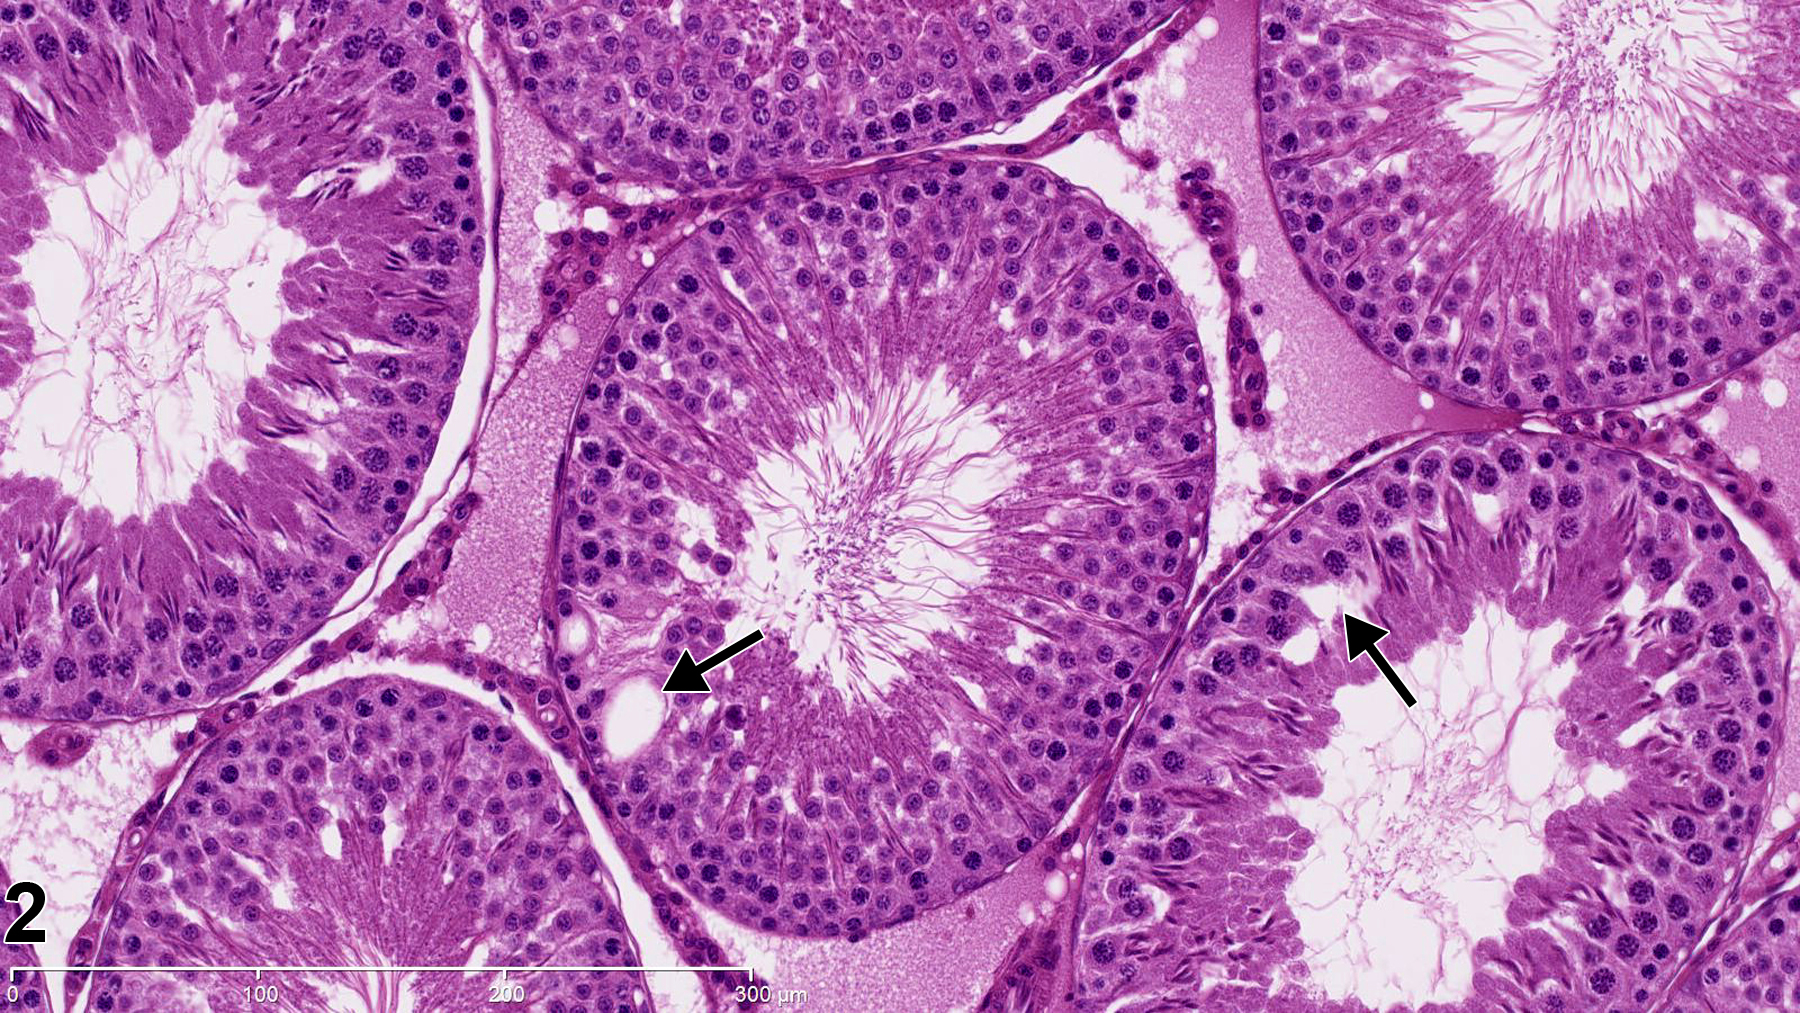 Image of seminiferous tubule vacuolation in the testis from a male Harlan Sprague-Dawley rat